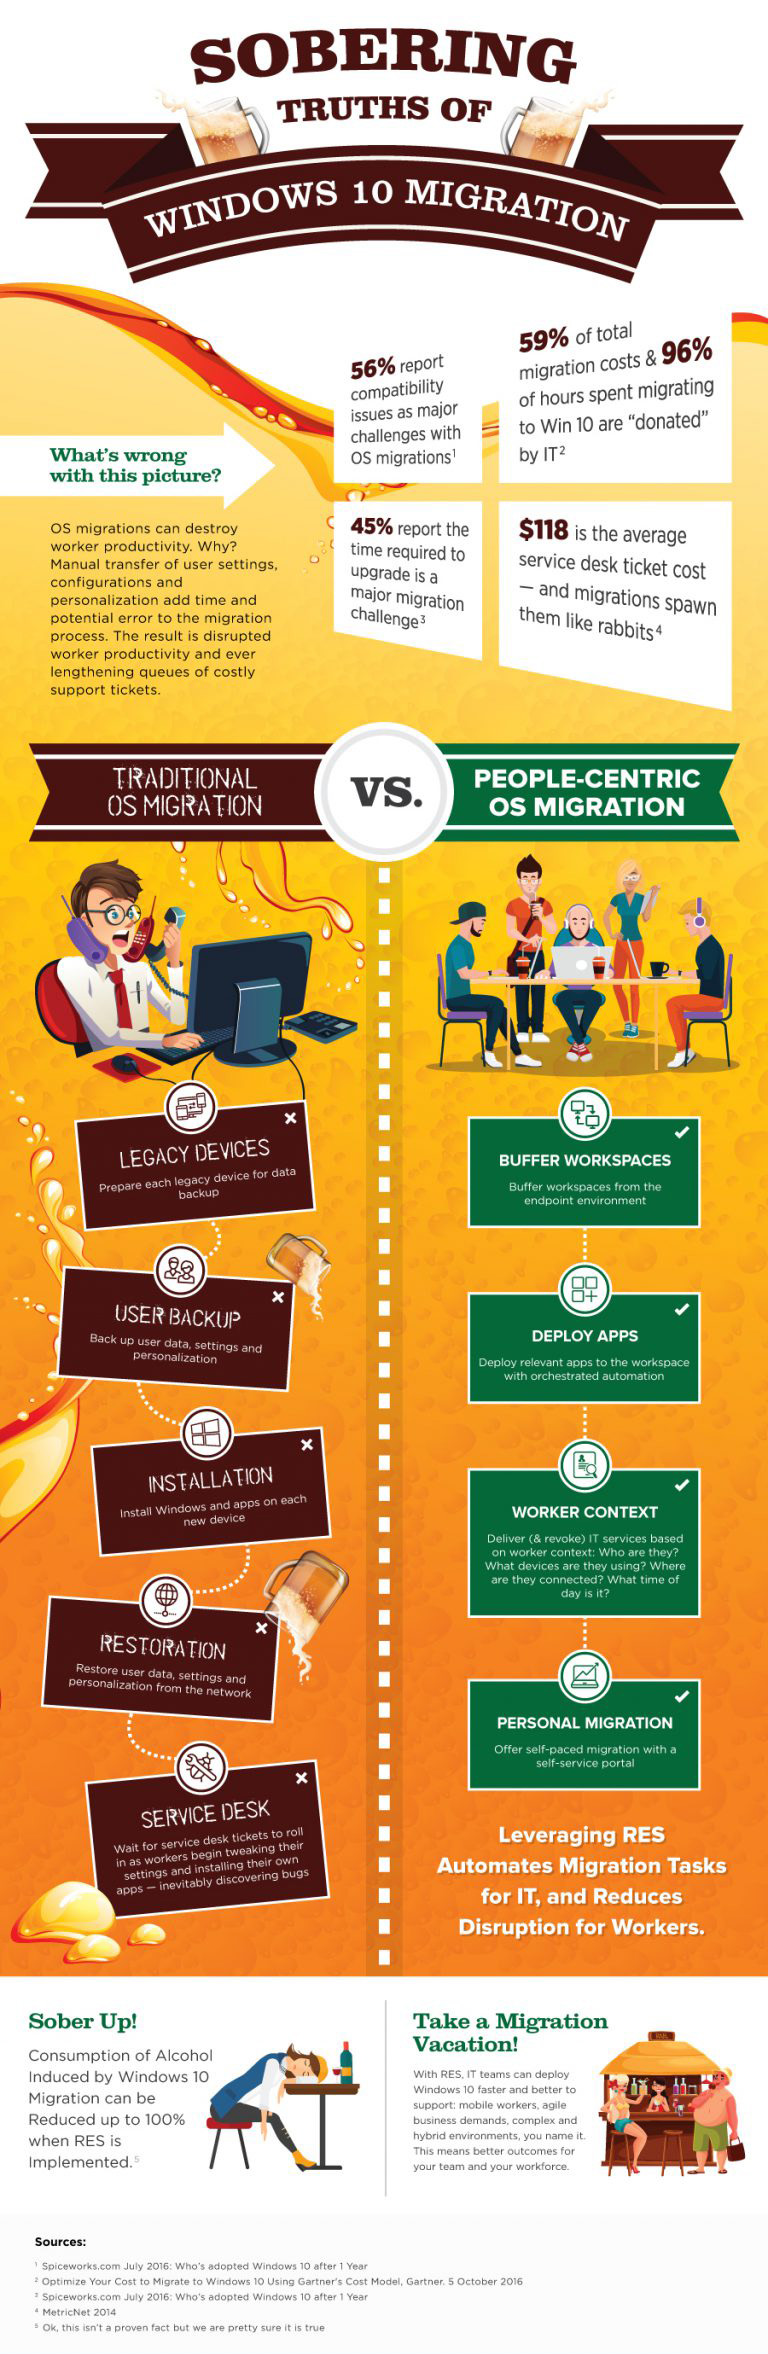 sobering truths of windows 10 migration infographic